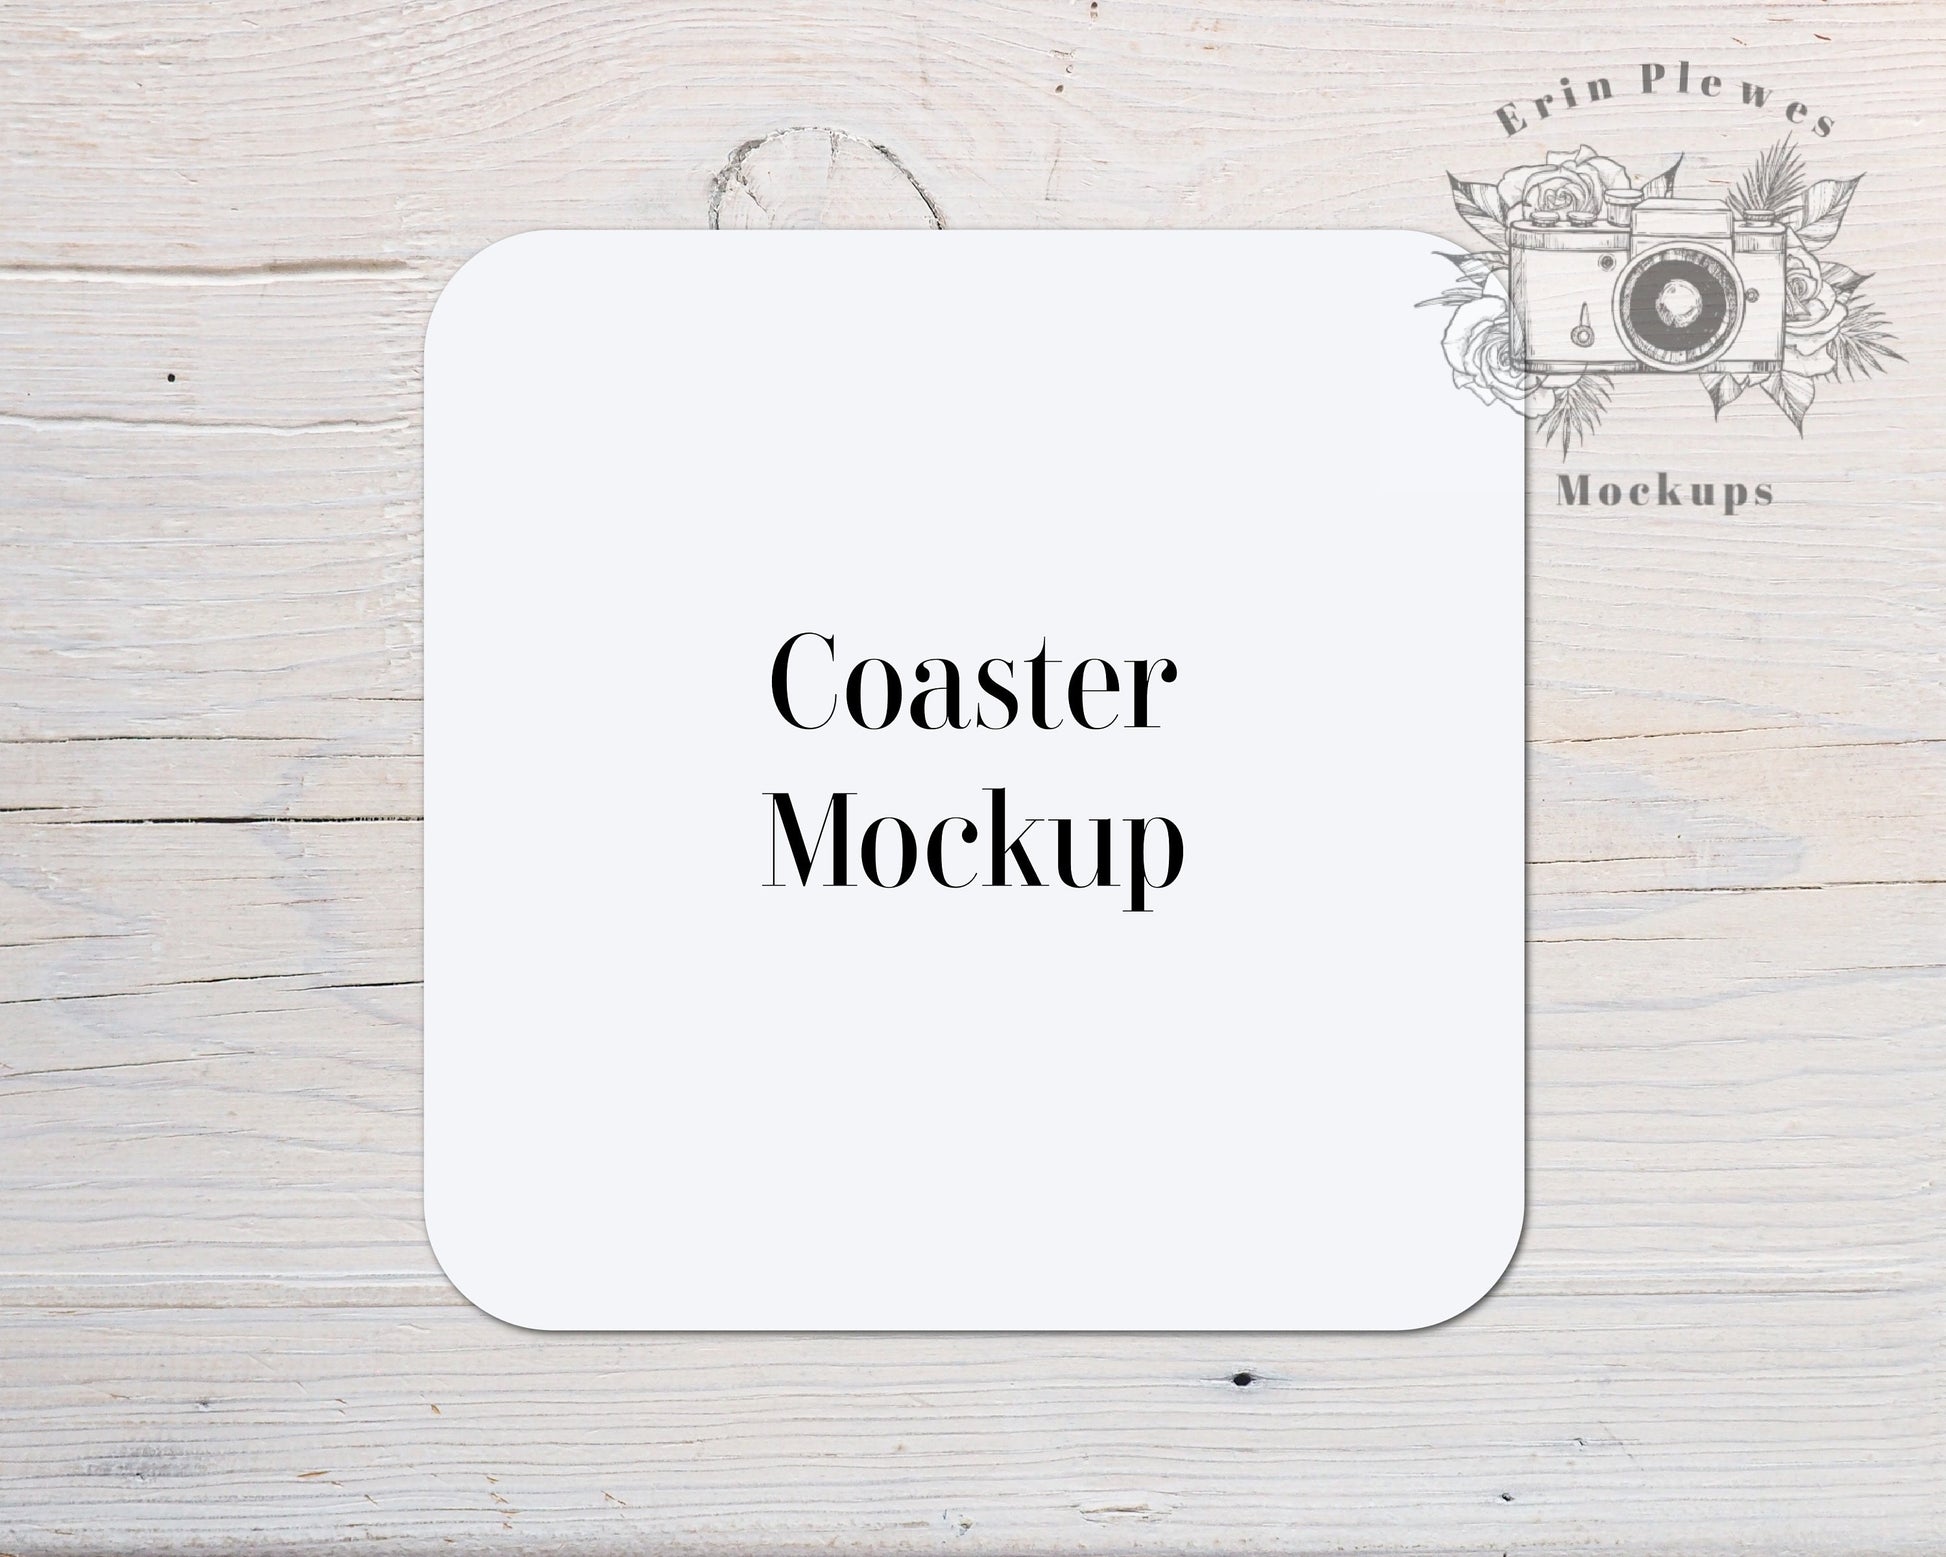 Square Sticker Mockup with Rounded Edges, Coaster Mock Up on Rustic White Wood, Jpeg Instant Digital Download Template